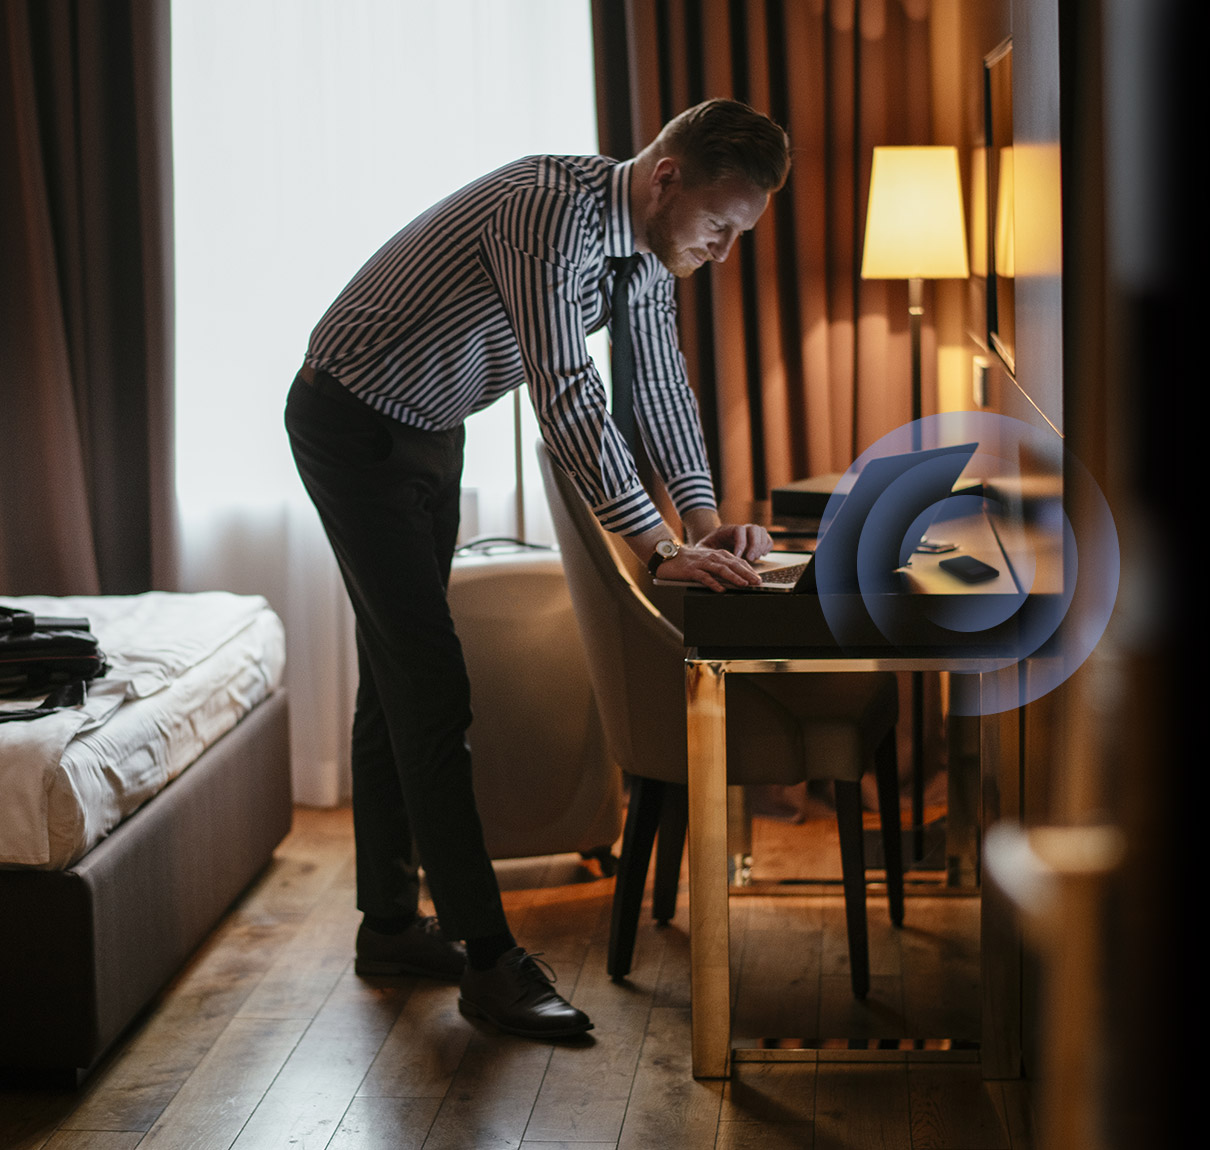 A man using a mobile hotspot to connect to a laptop on a desk inside a hotel.